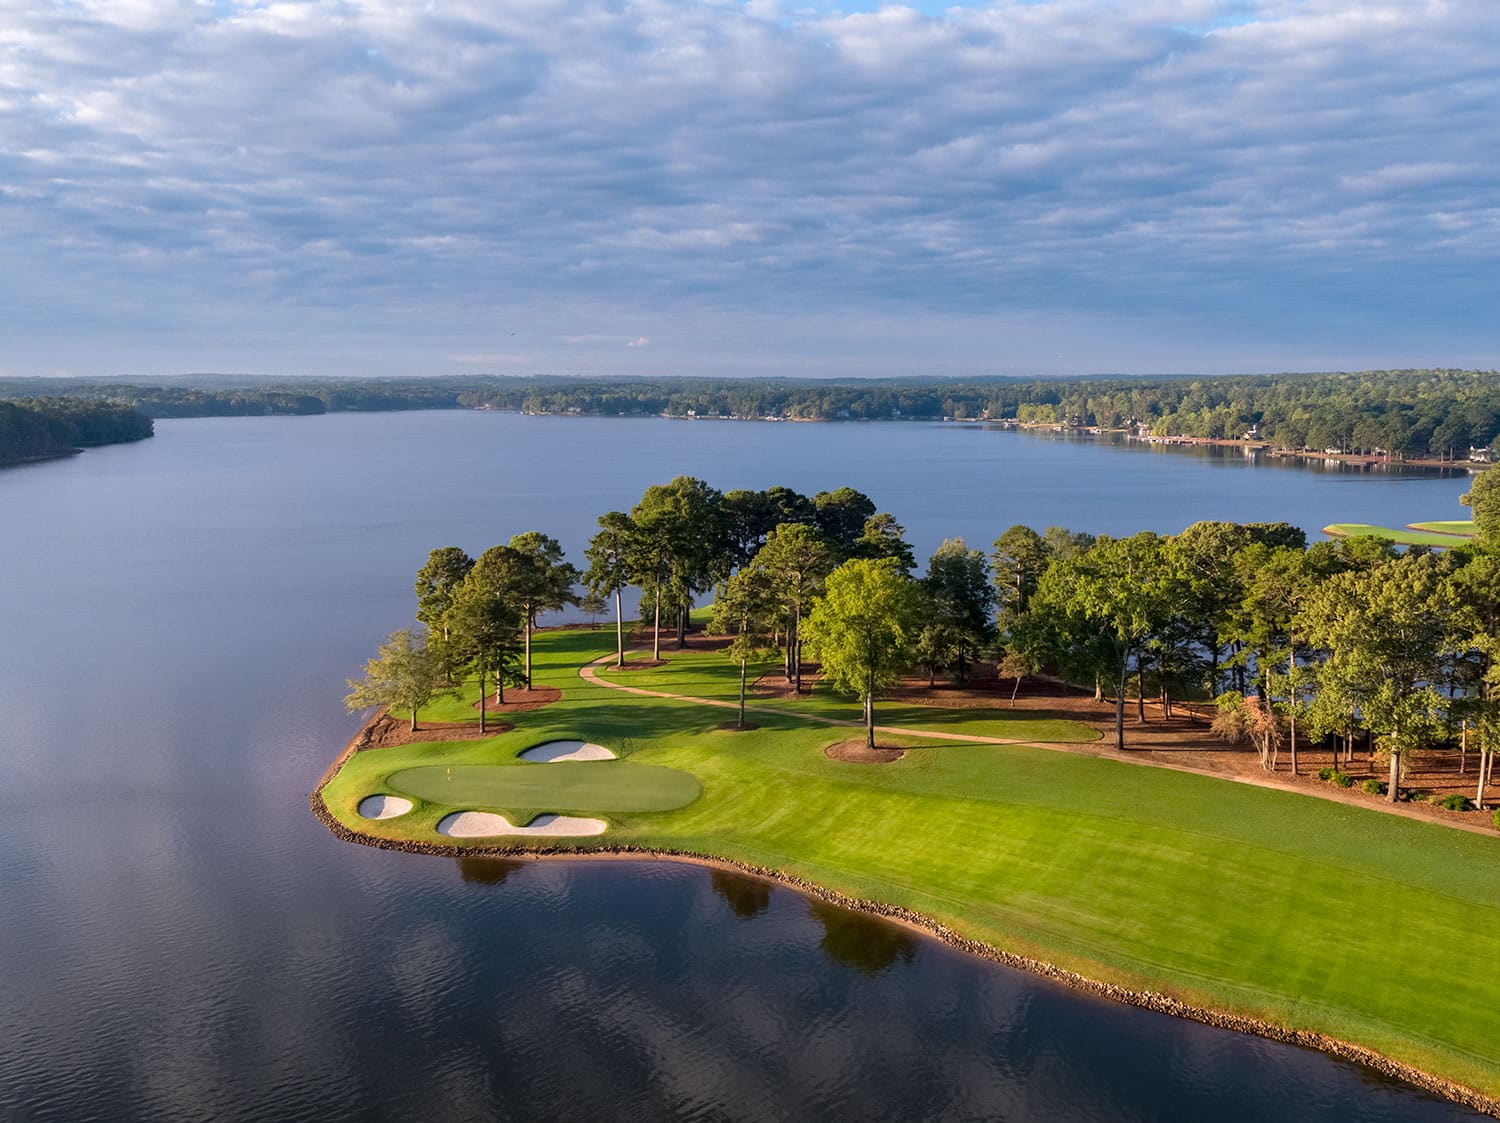 An aerial view of a golf hole at the Great Waters course at Reynolds Lake Oconee in Georgia.